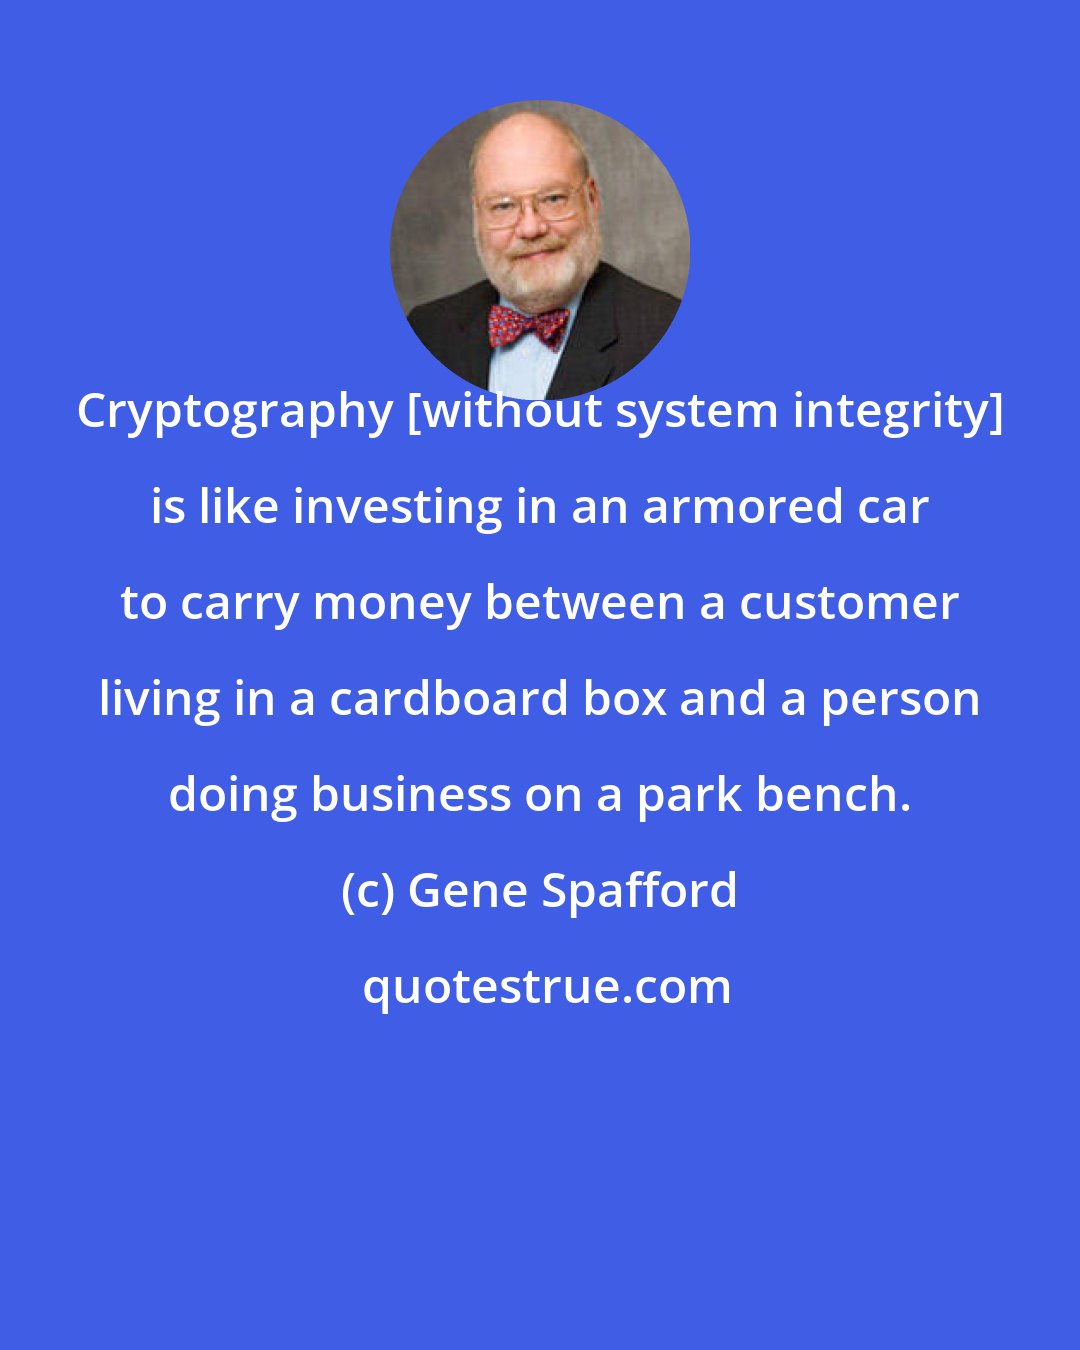 Gene Spafford: Cryptography [without system integrity] is like investing in an armored car to carry money between a customer living in a cardboard box and a person doing business on a park bench.